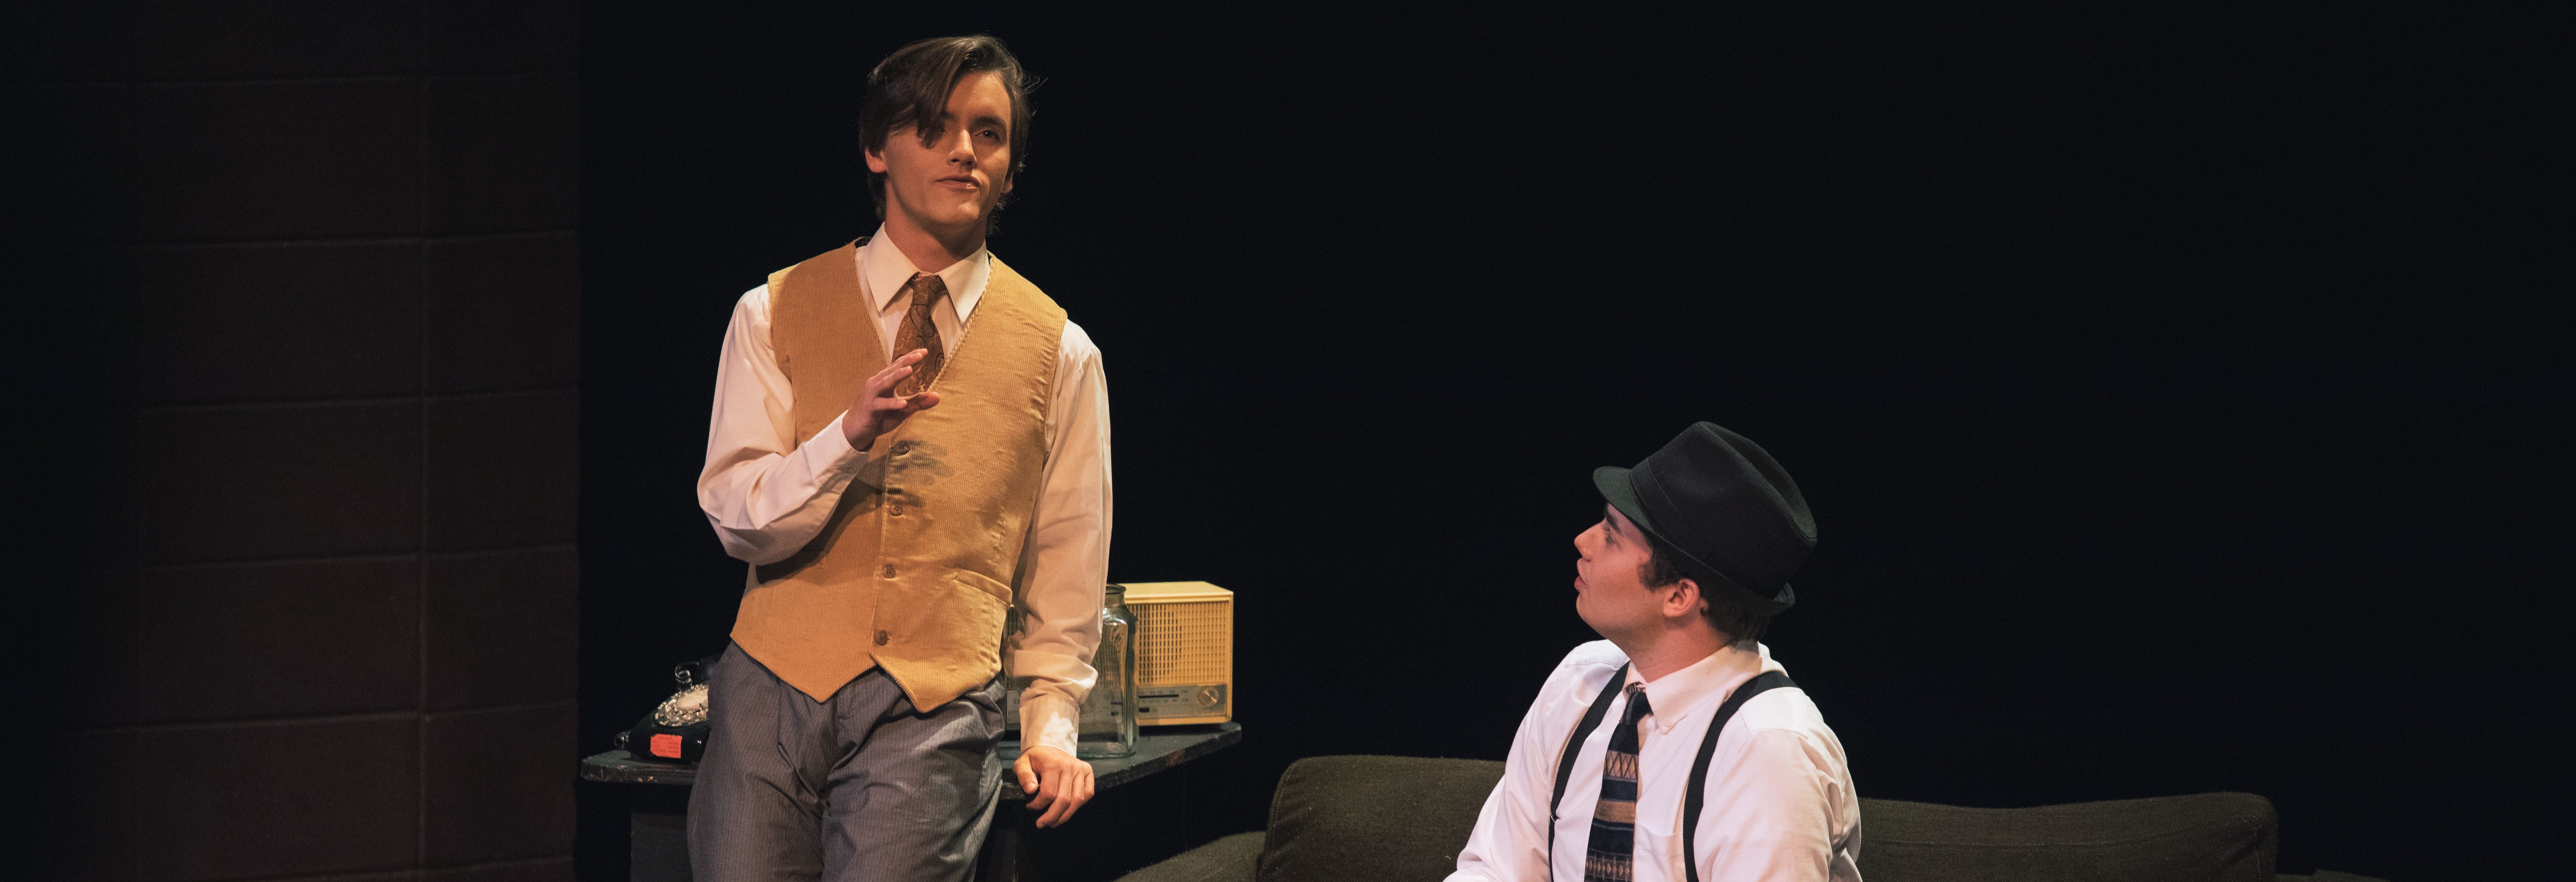 Ouachita's One-Act Play Festival will honor Tennessee Williams through adapted theatre performances.